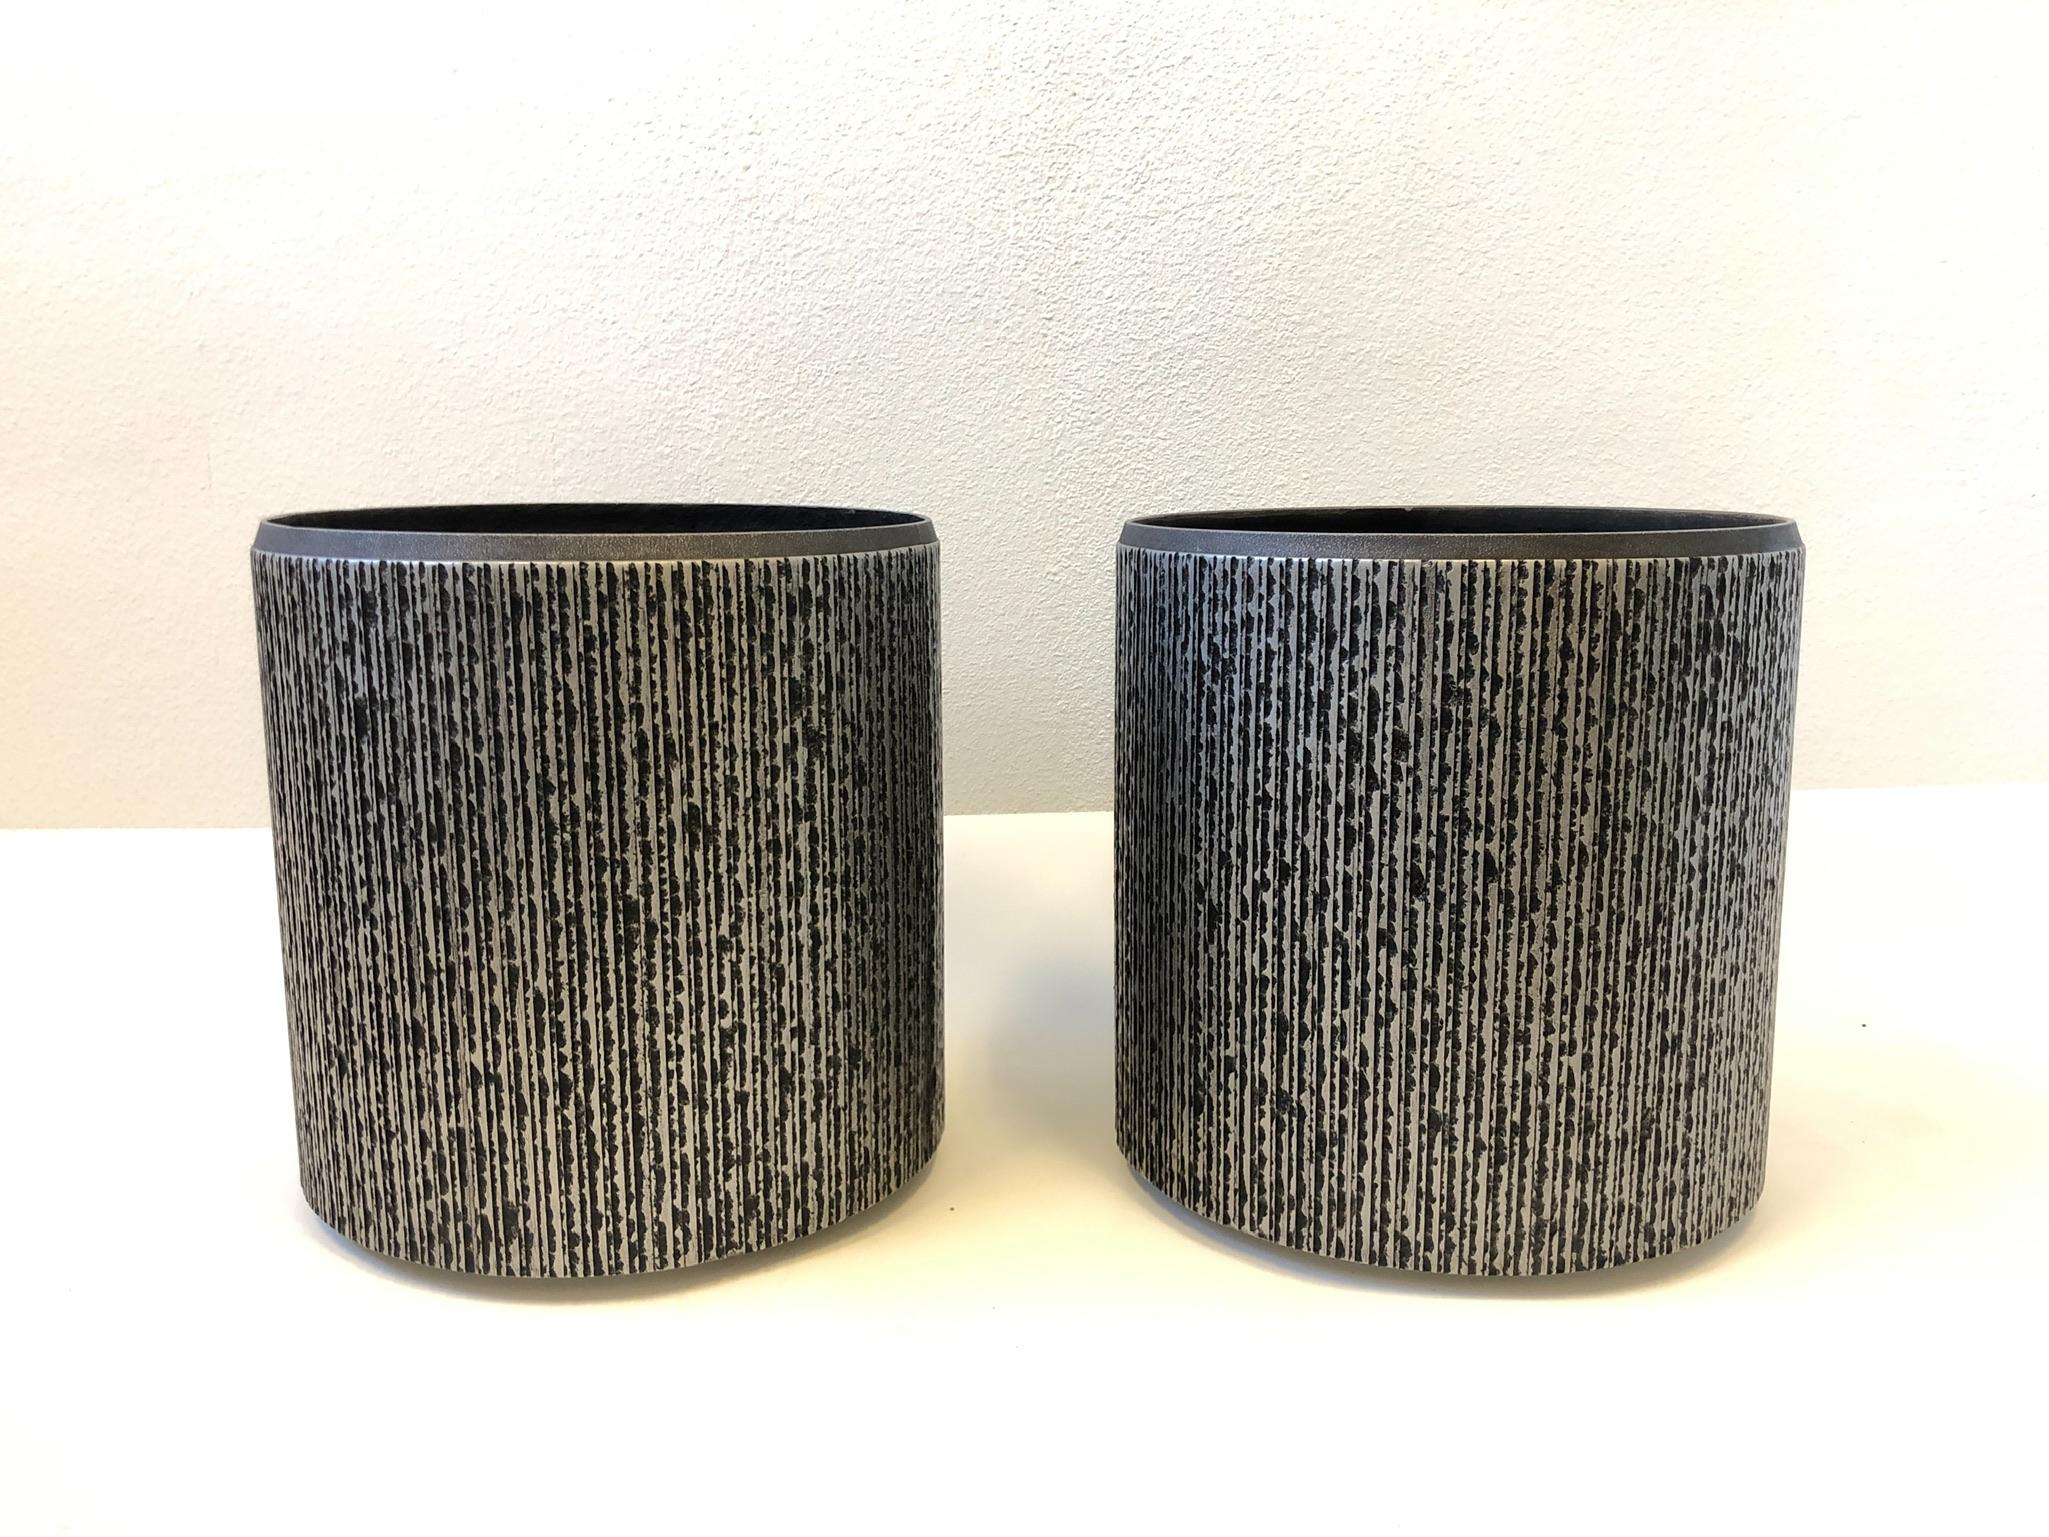 Brutalist pair of architectural planters designed by Forms and Surfaces for Steve Chase. 
The planters came out of a Steve Chase estate in Palm Desert CA. 
Constructed of fiberglass with a silver and black finish. 
Dimensions: 19.75” high and